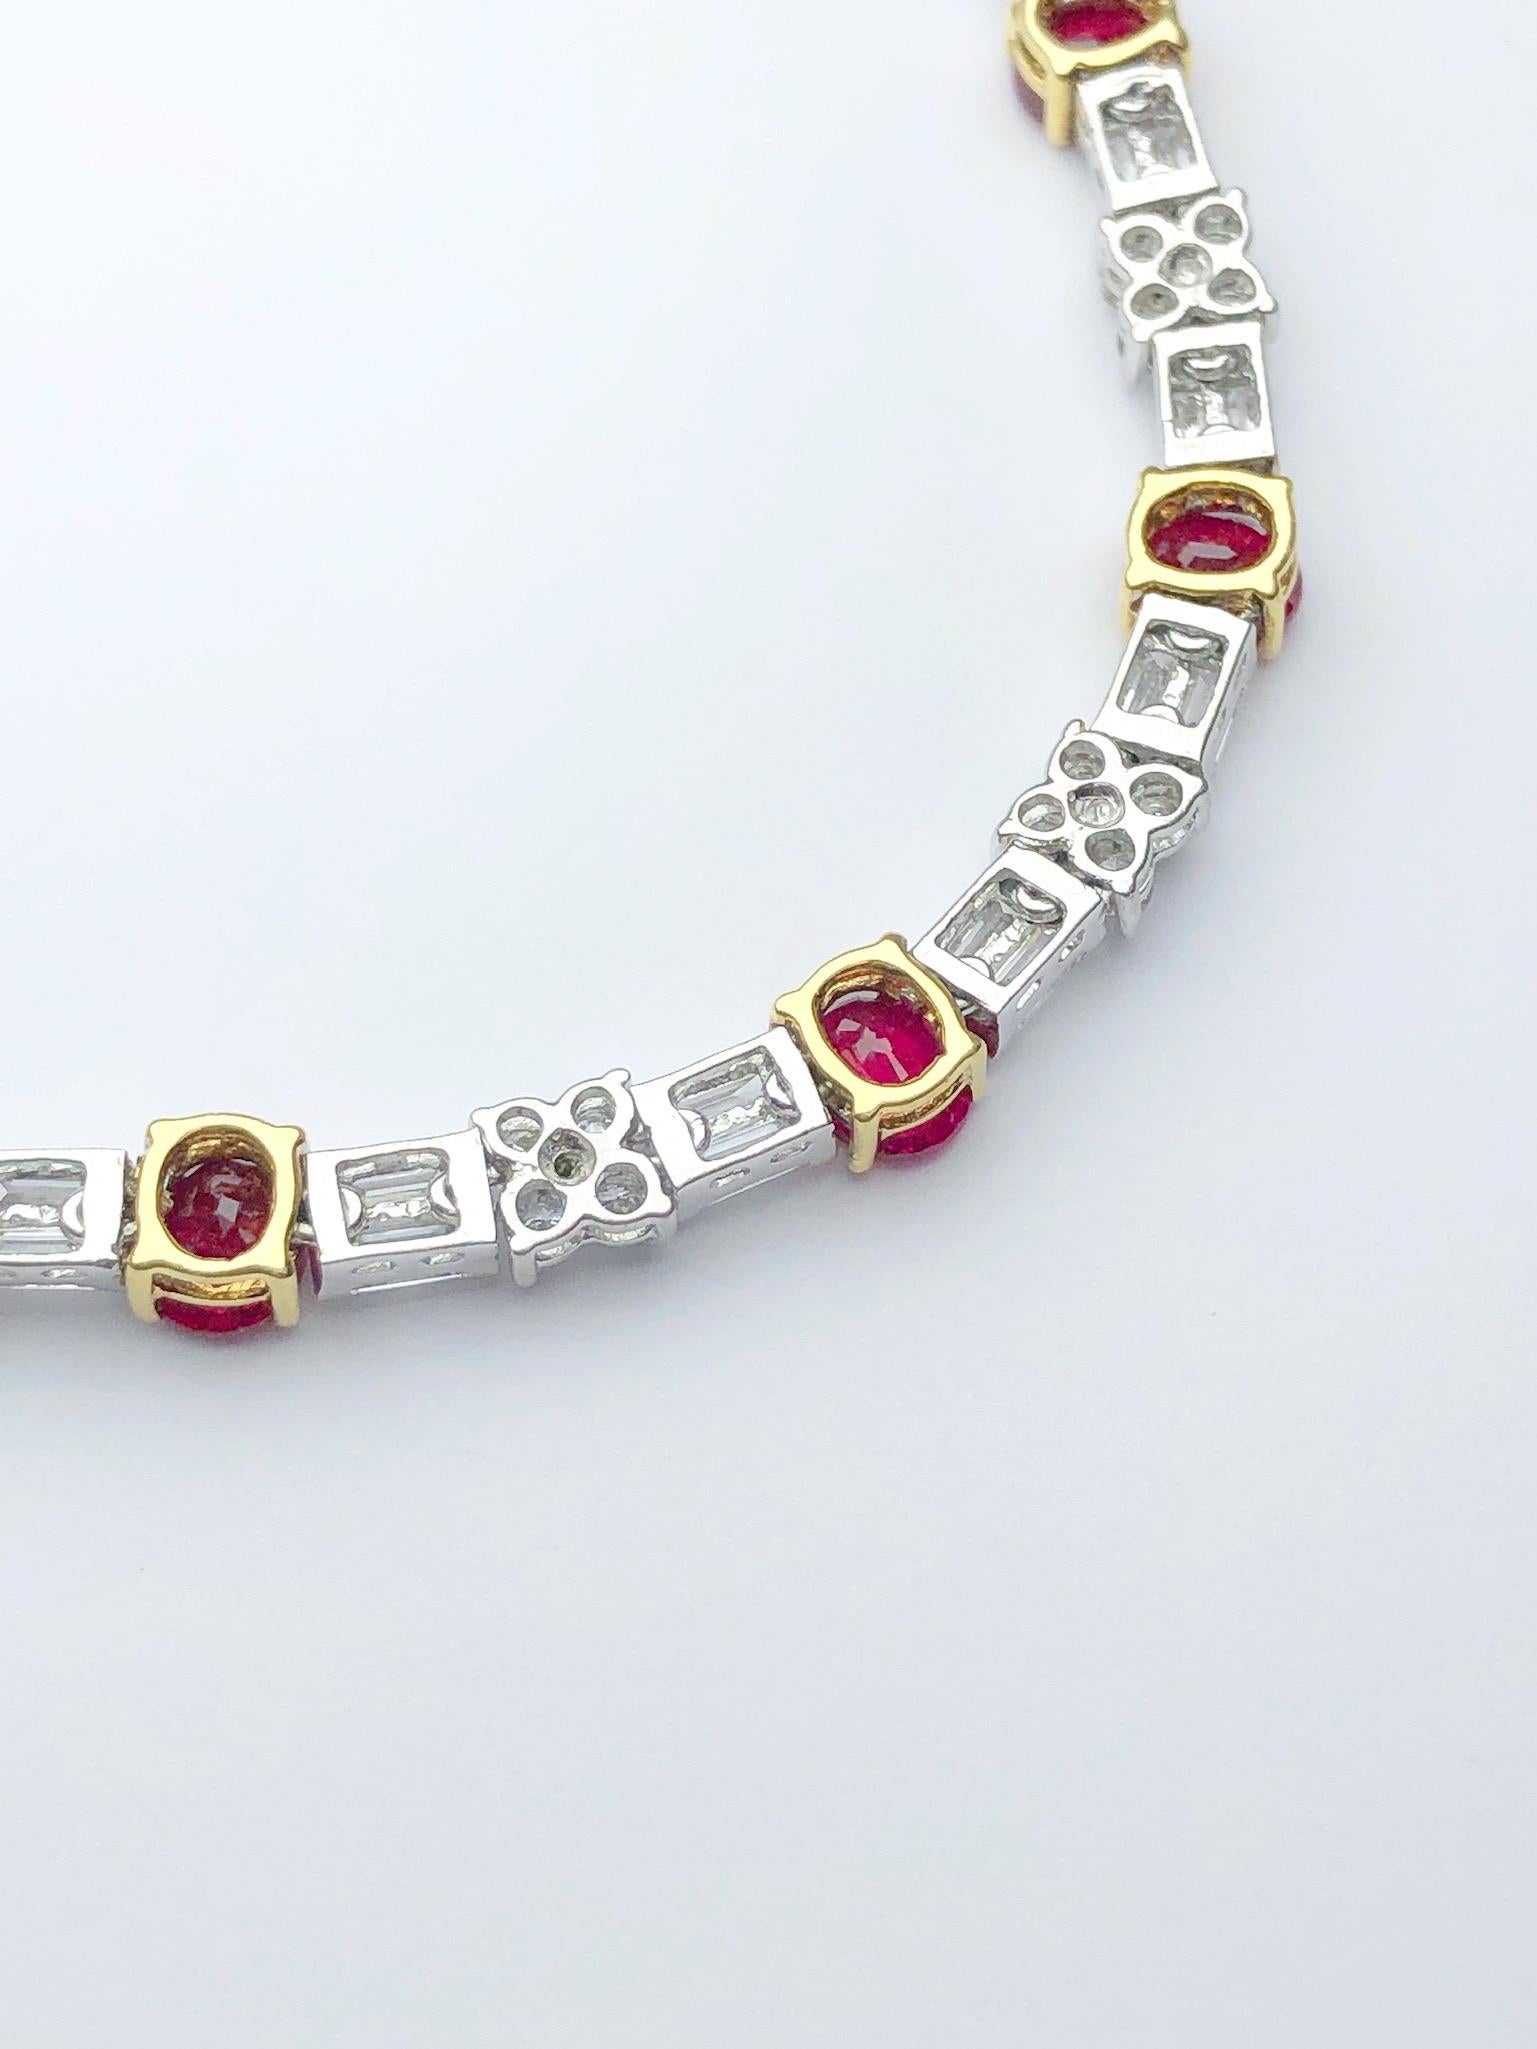 Modern Platinum Necklace with 16.82 Carat Rubies and 10.02 Carat Diamonds For Sale